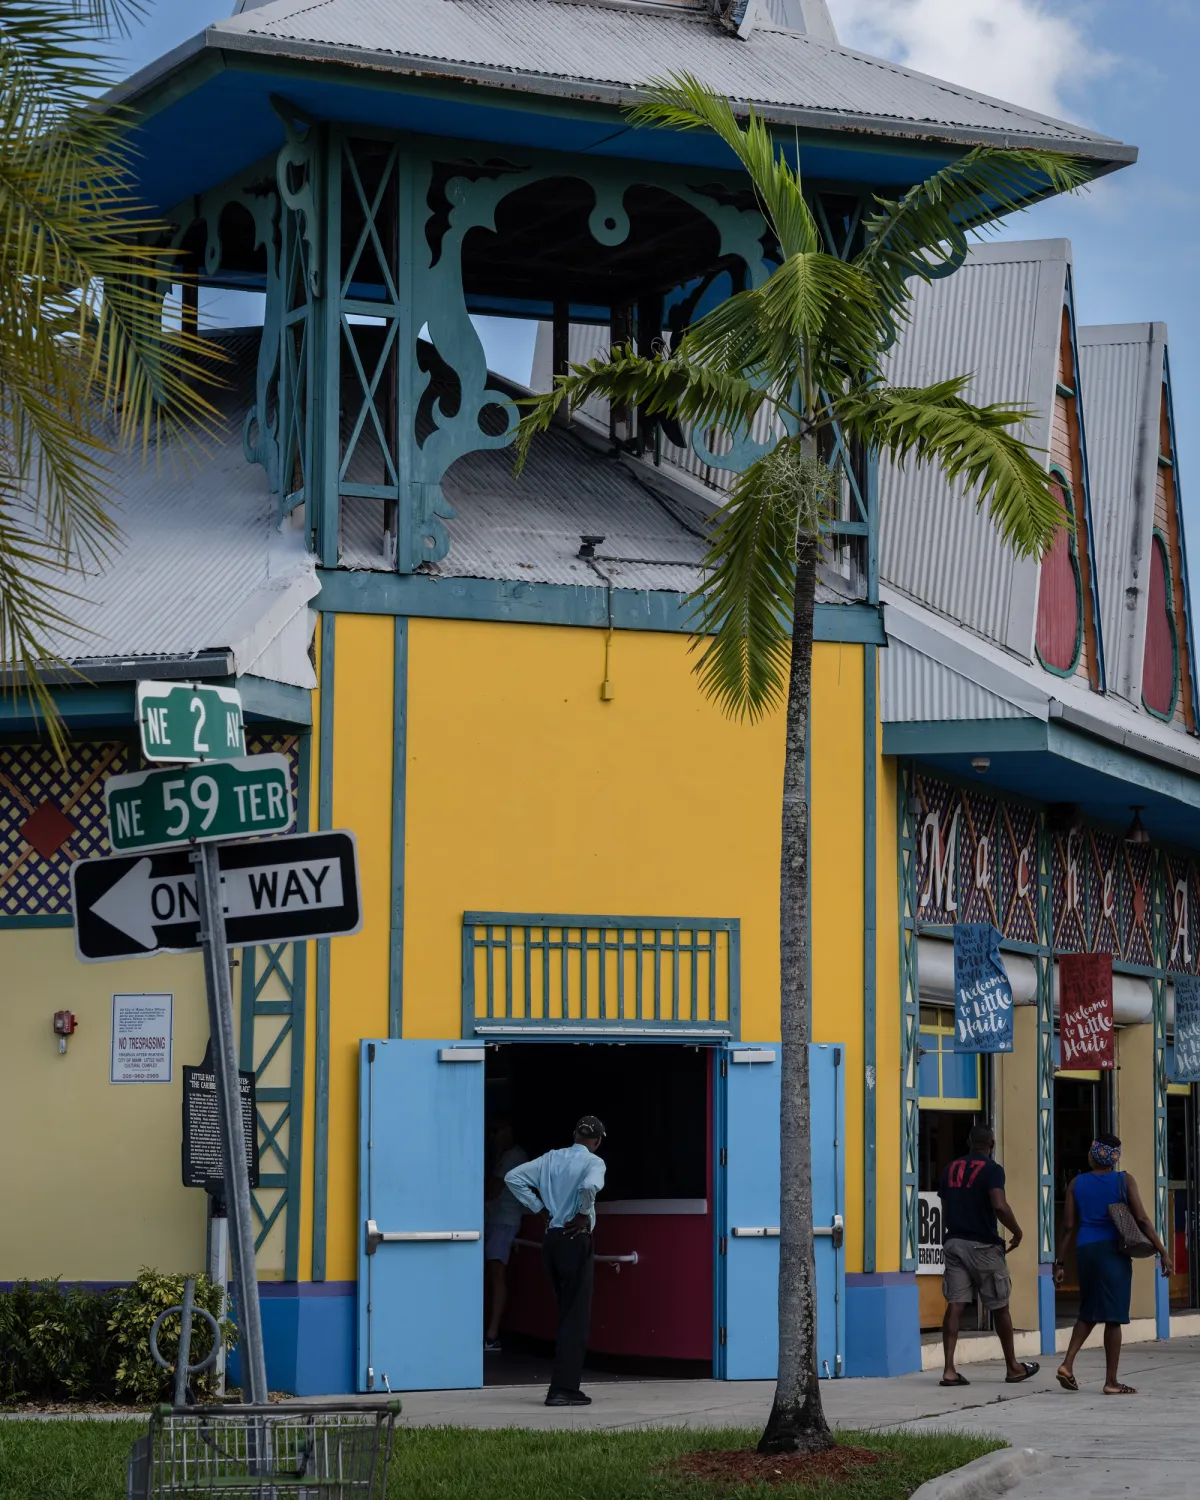 A vibrant yellow and blue building at the Little Haiti Cultural Center in Miami, with palm trees surrounding it on a clear, sunny day. A street sign and a one-way sign are positioned in the front.